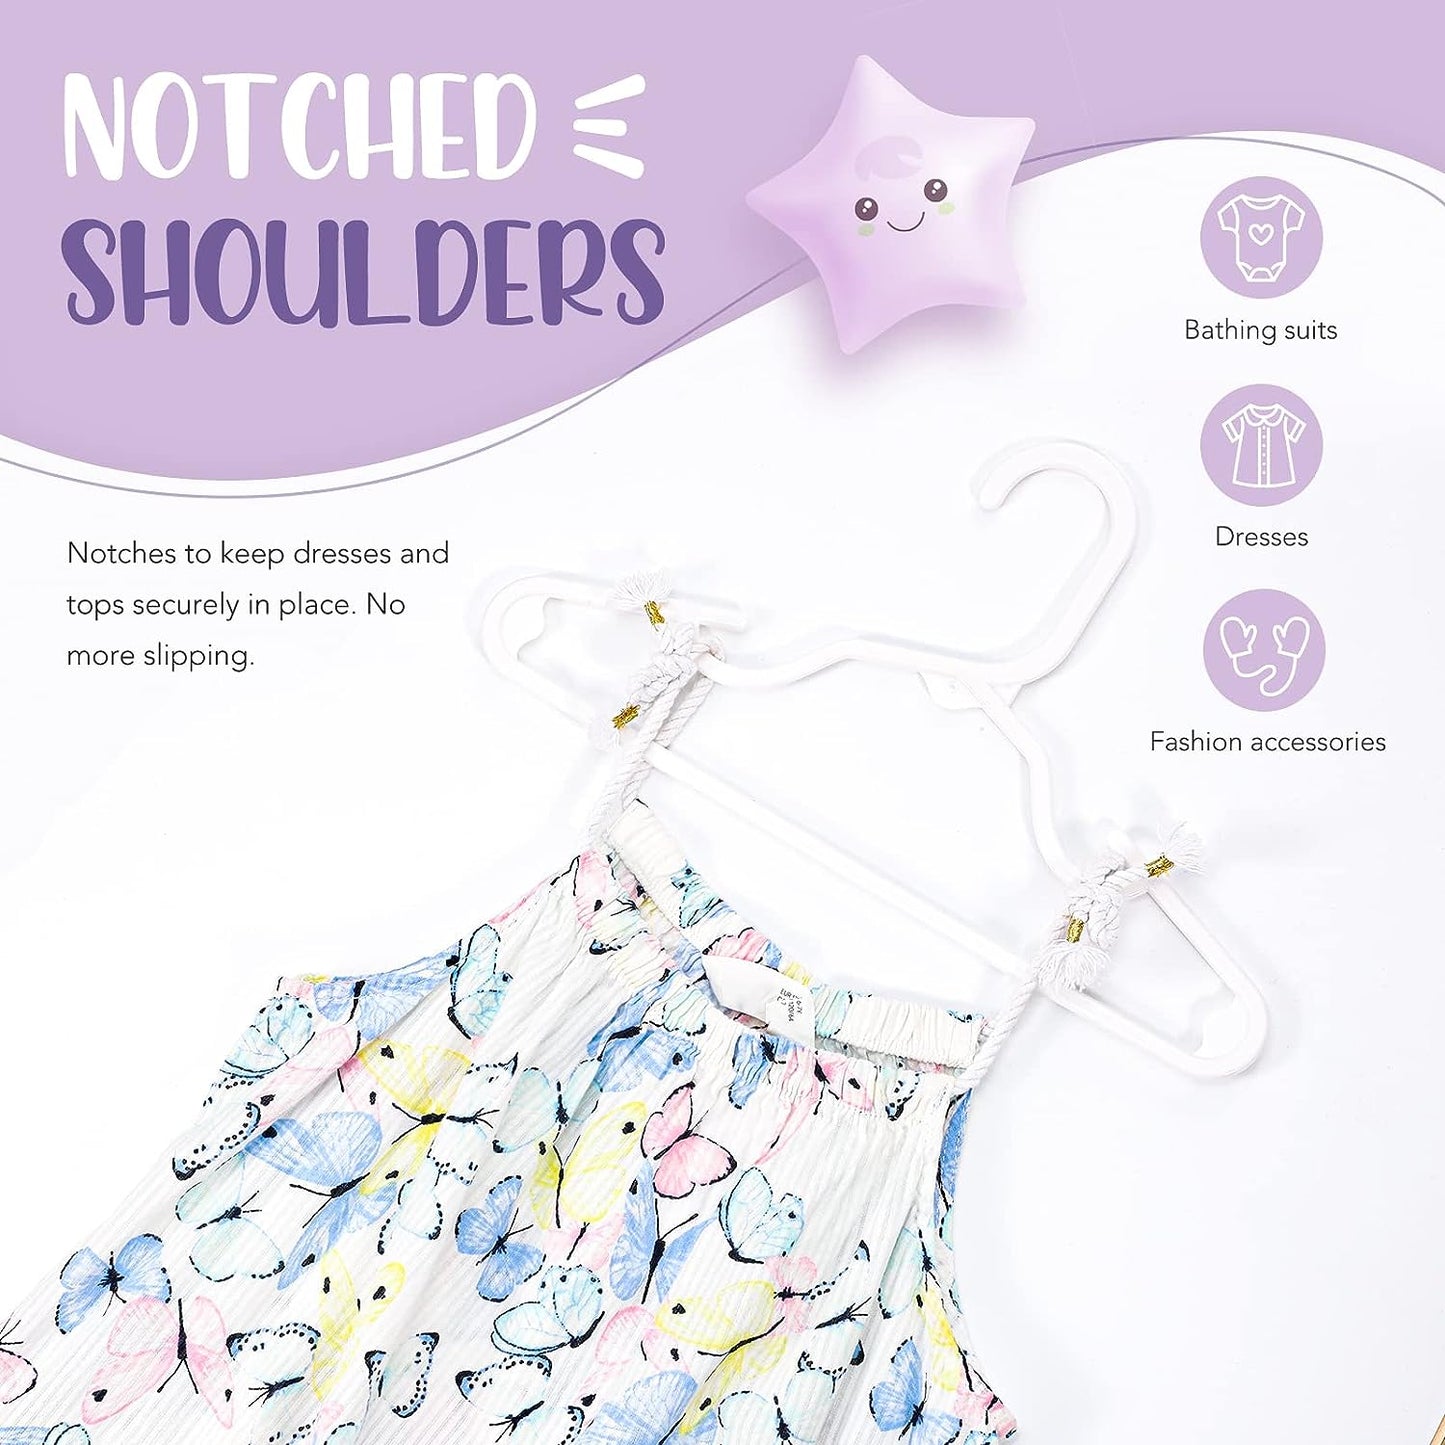 HOUSE DAY 11.7x6.5 Inch Plastic Baby Hangers for Closet 60 Pack